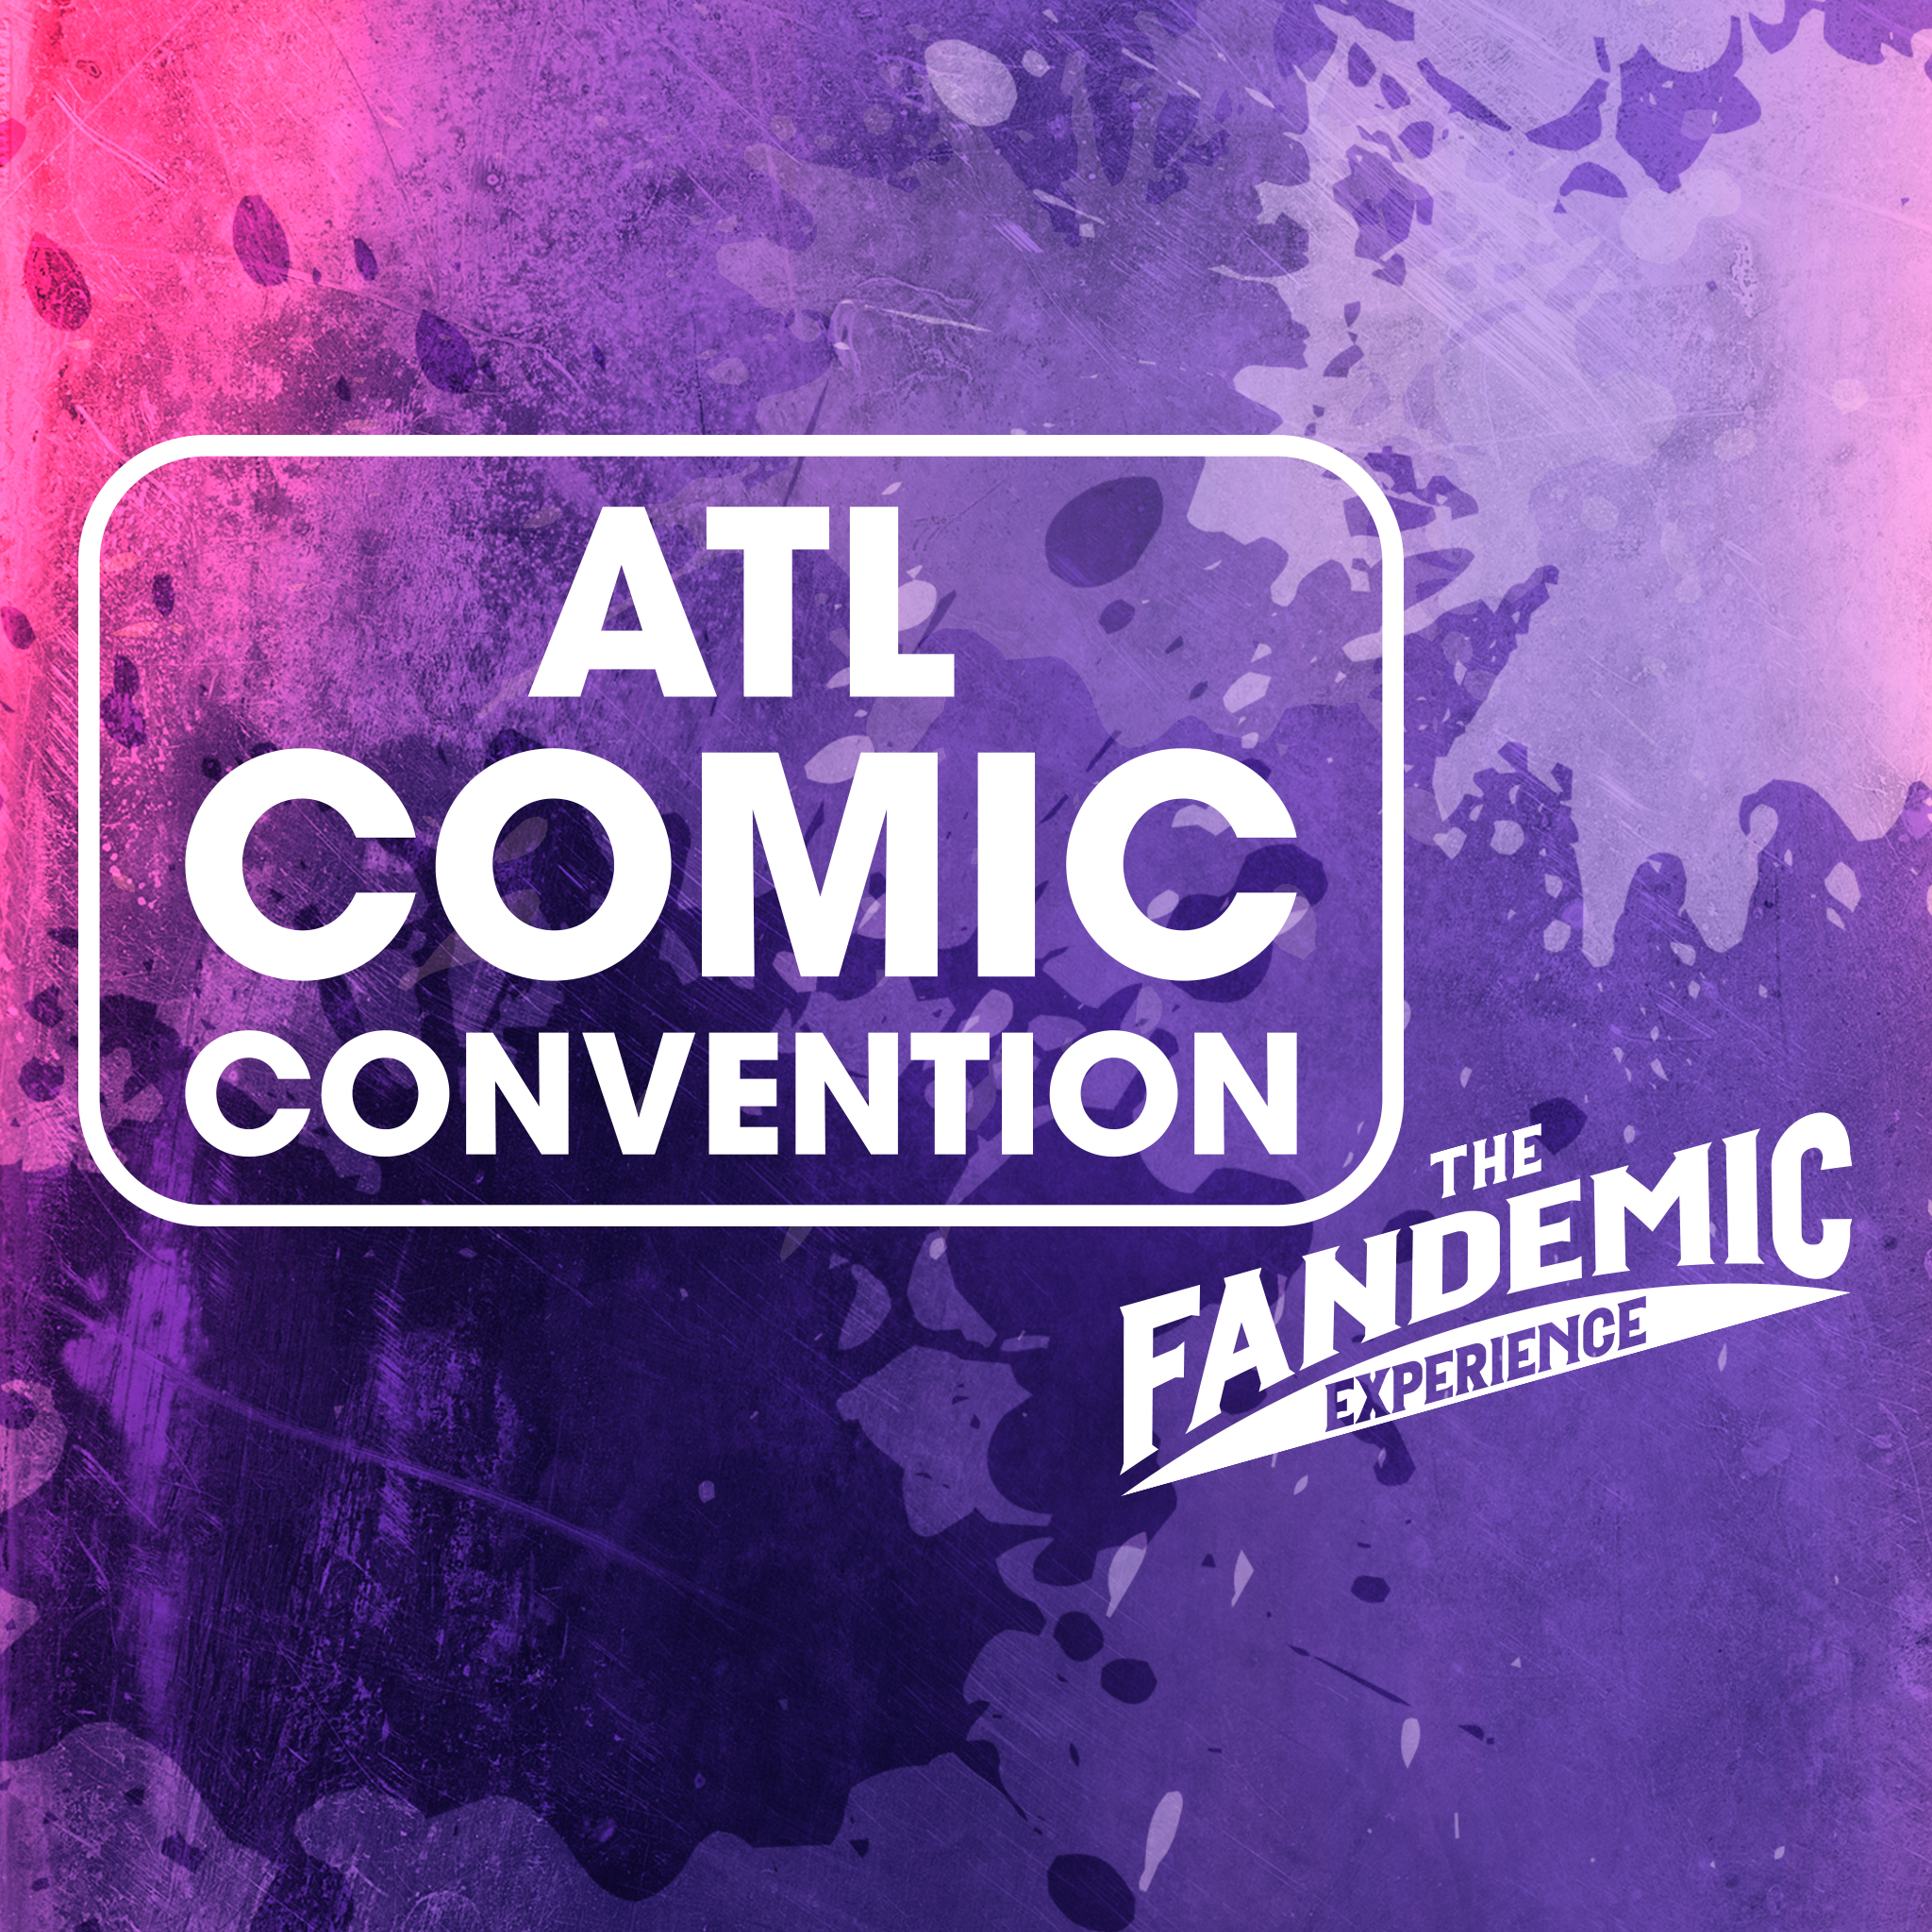 Updates on The Fandemic Dead at ATL Comic Convention